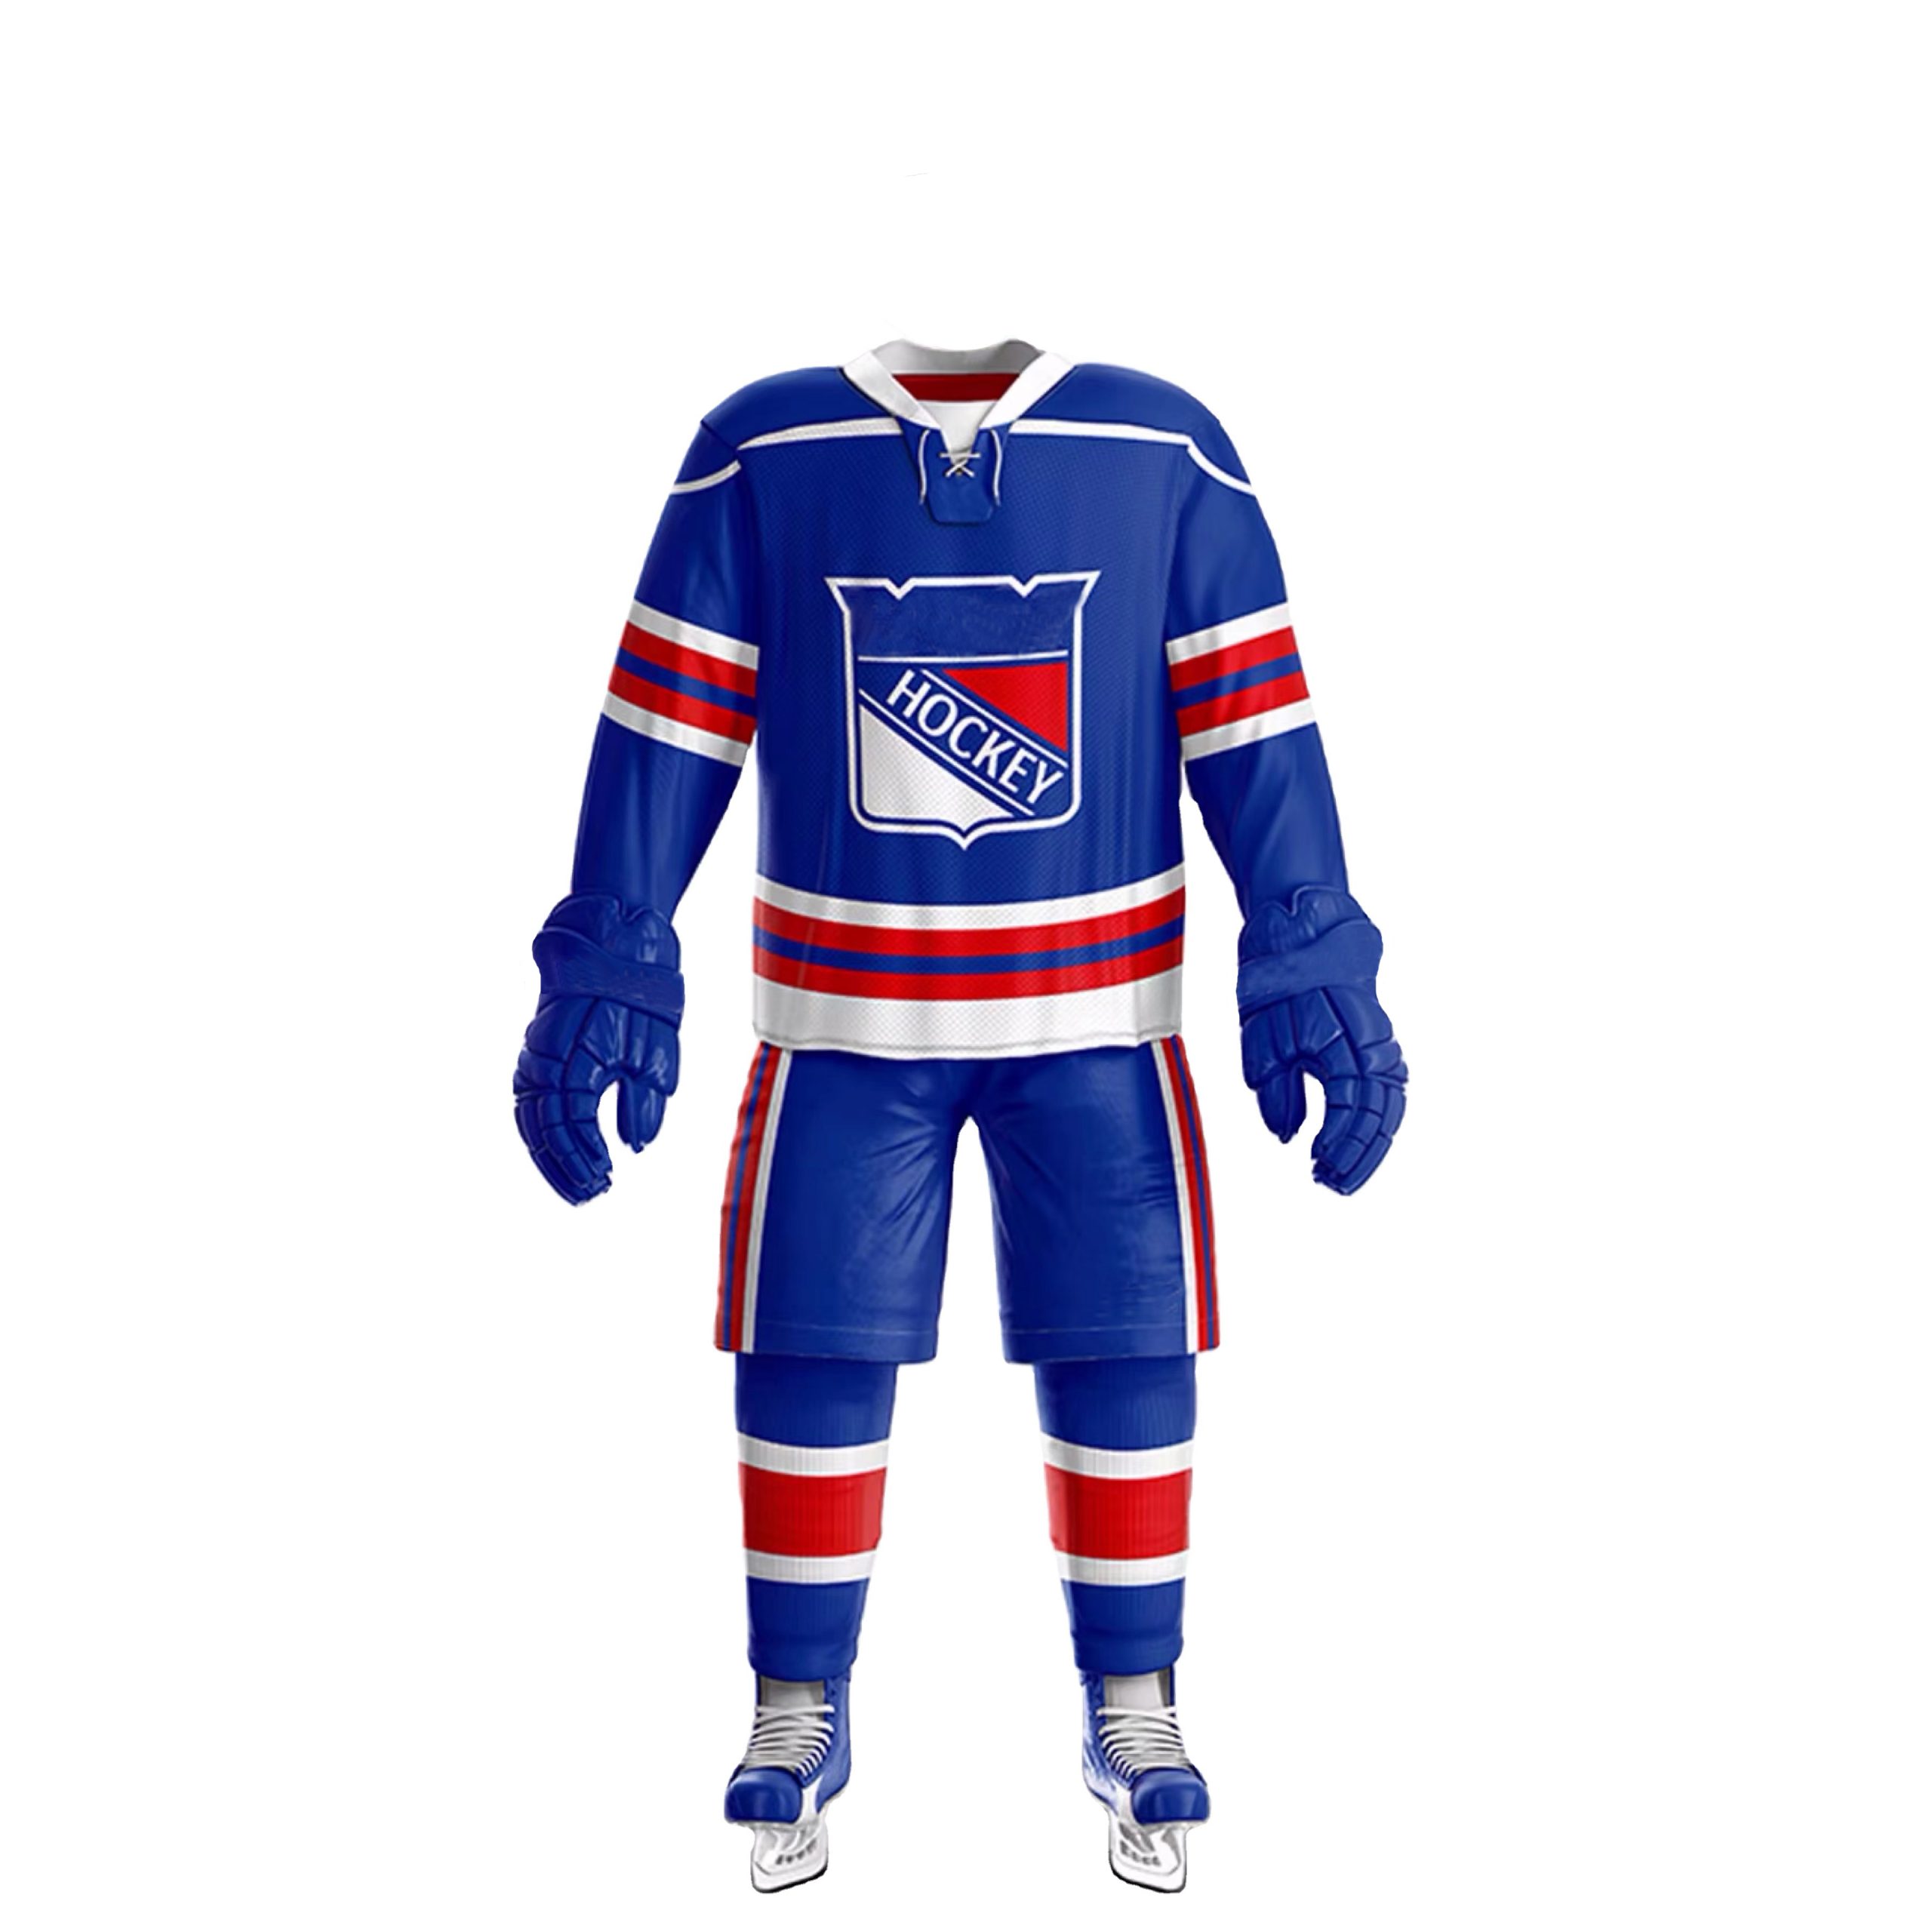 Sublimated Hockey Jersey - Your Design 